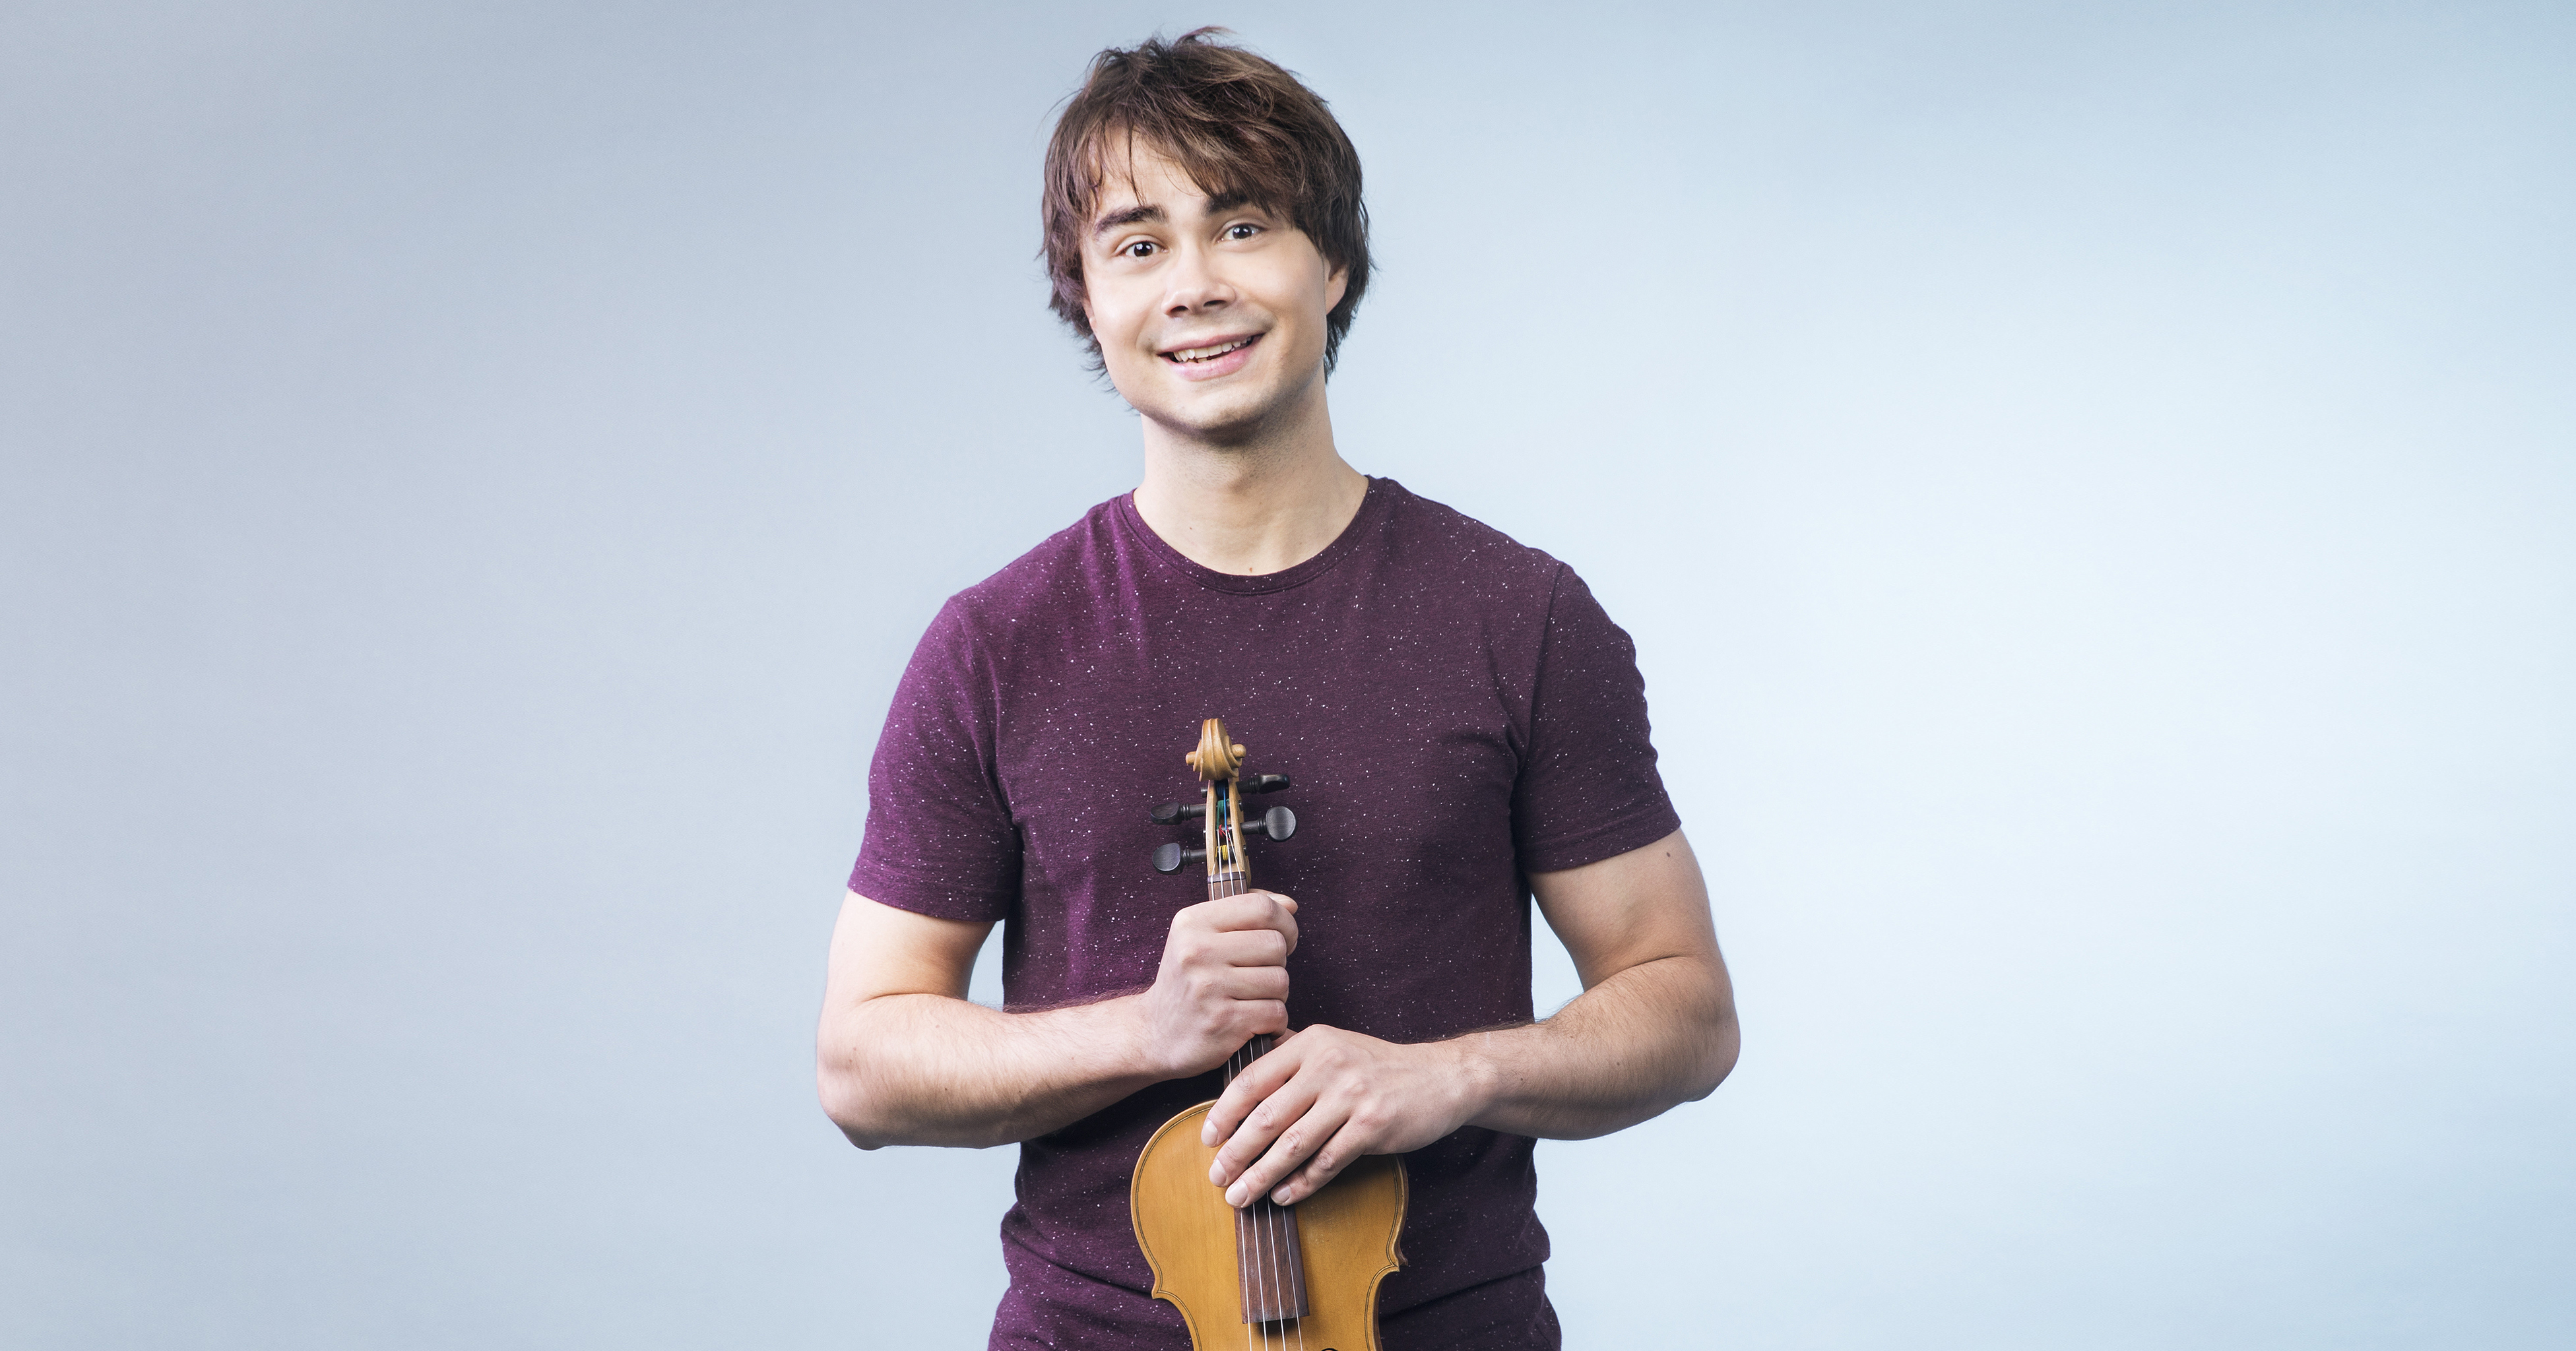 Eurovision participant from Norway Alexander Rybak wallpaper and image, picture, photo